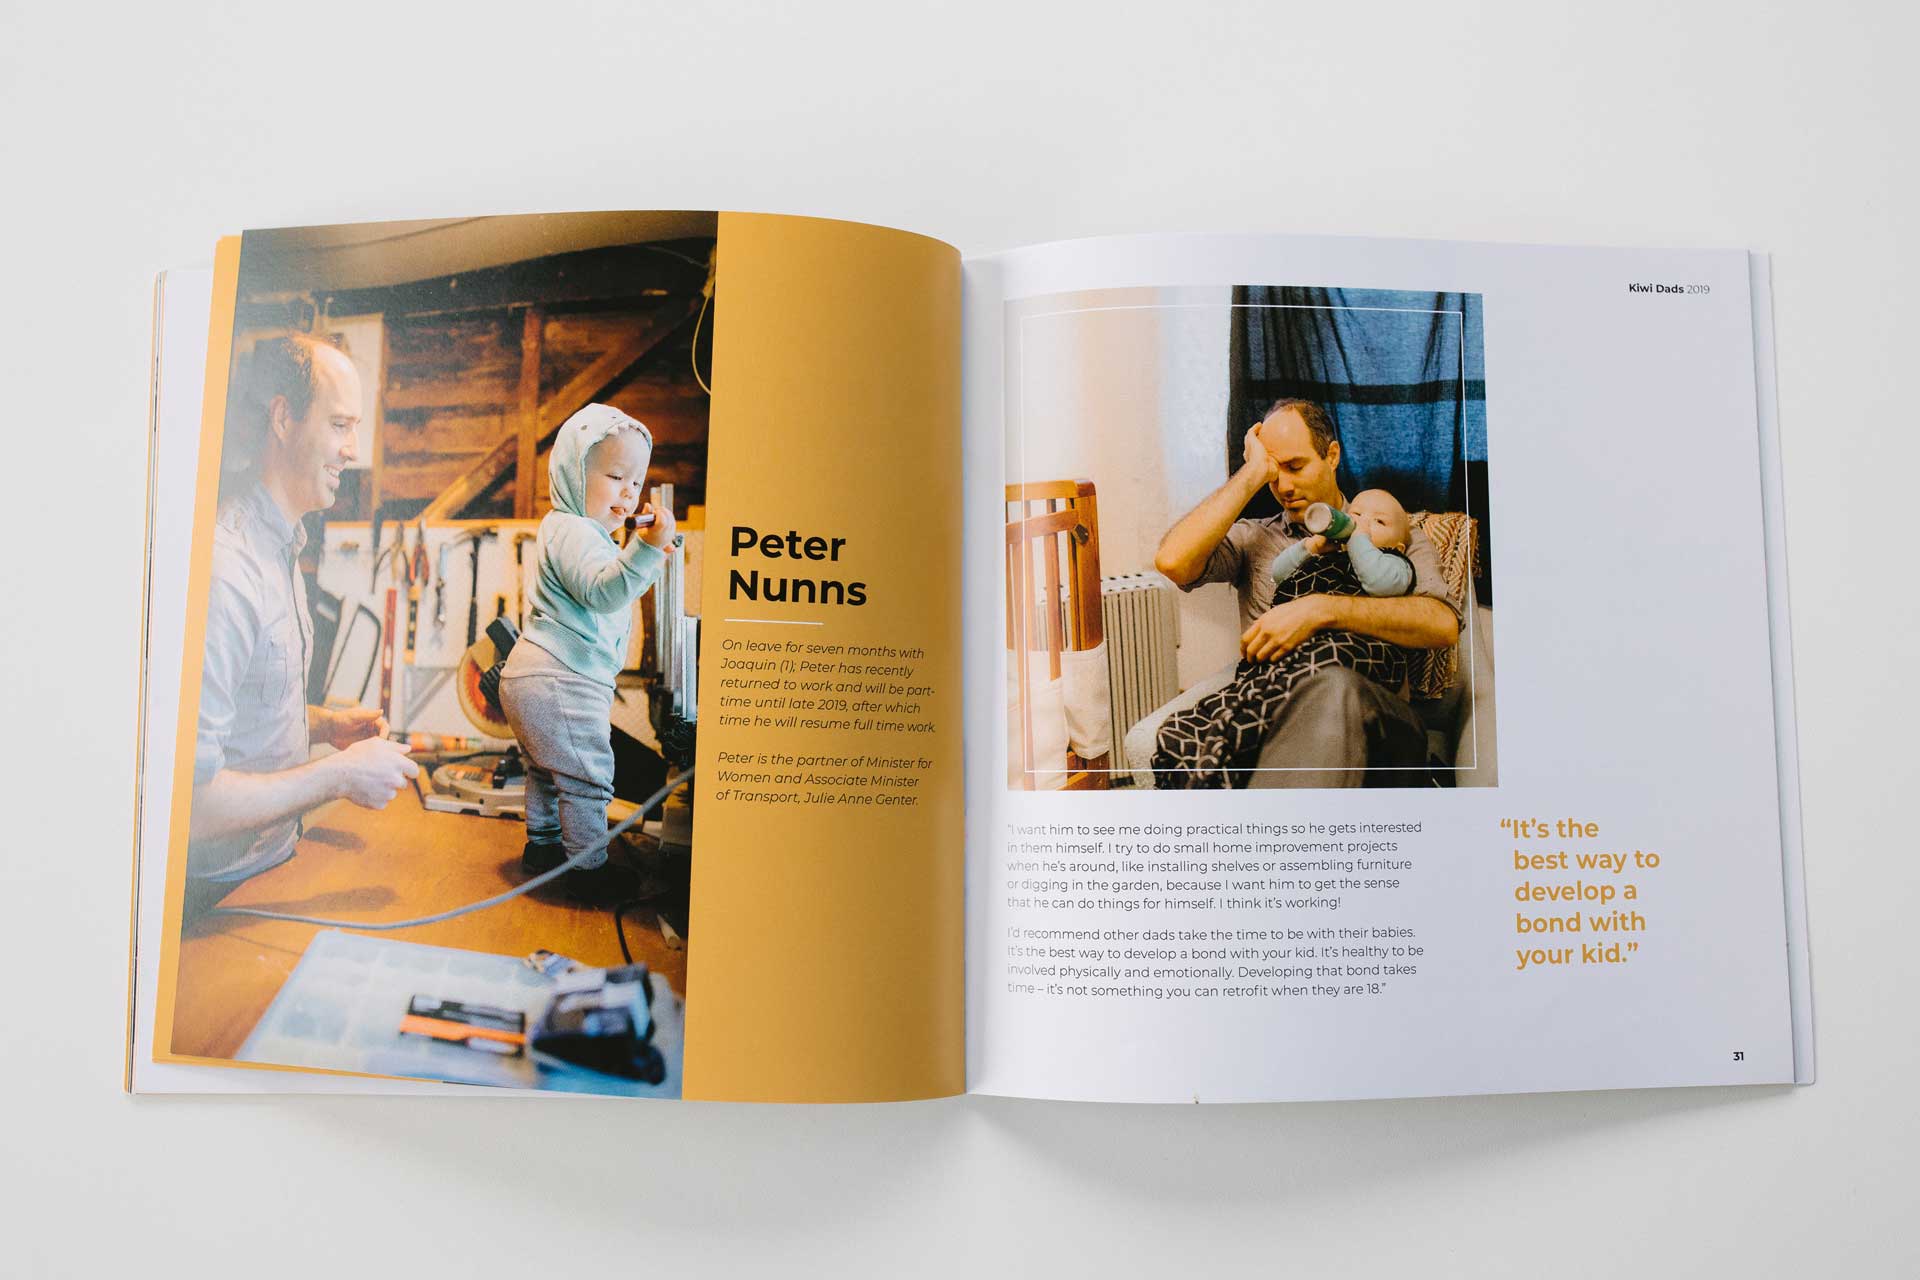 kiwi dads booklet photo of peter numms playing with child photos by sarah weber photography